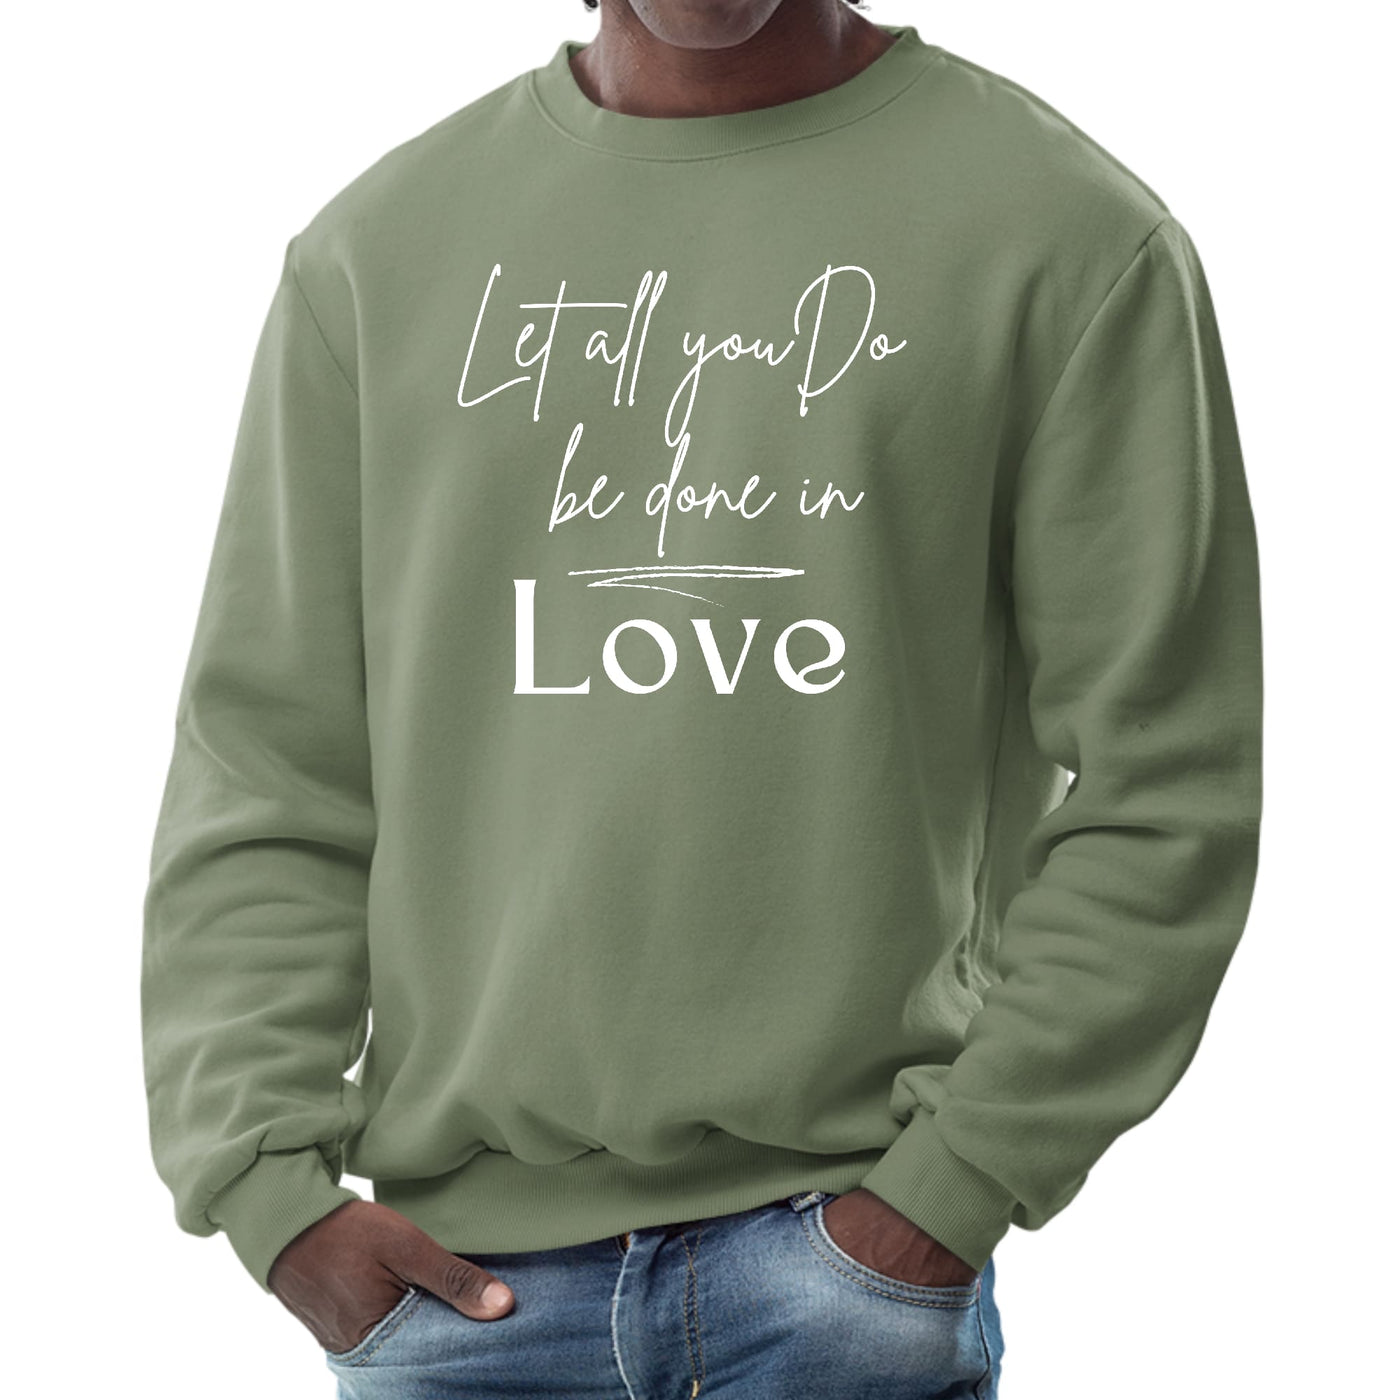 Mens Graphic Sweatshirt Let All You Do Be Done In Love - Mens | Sweatshirts